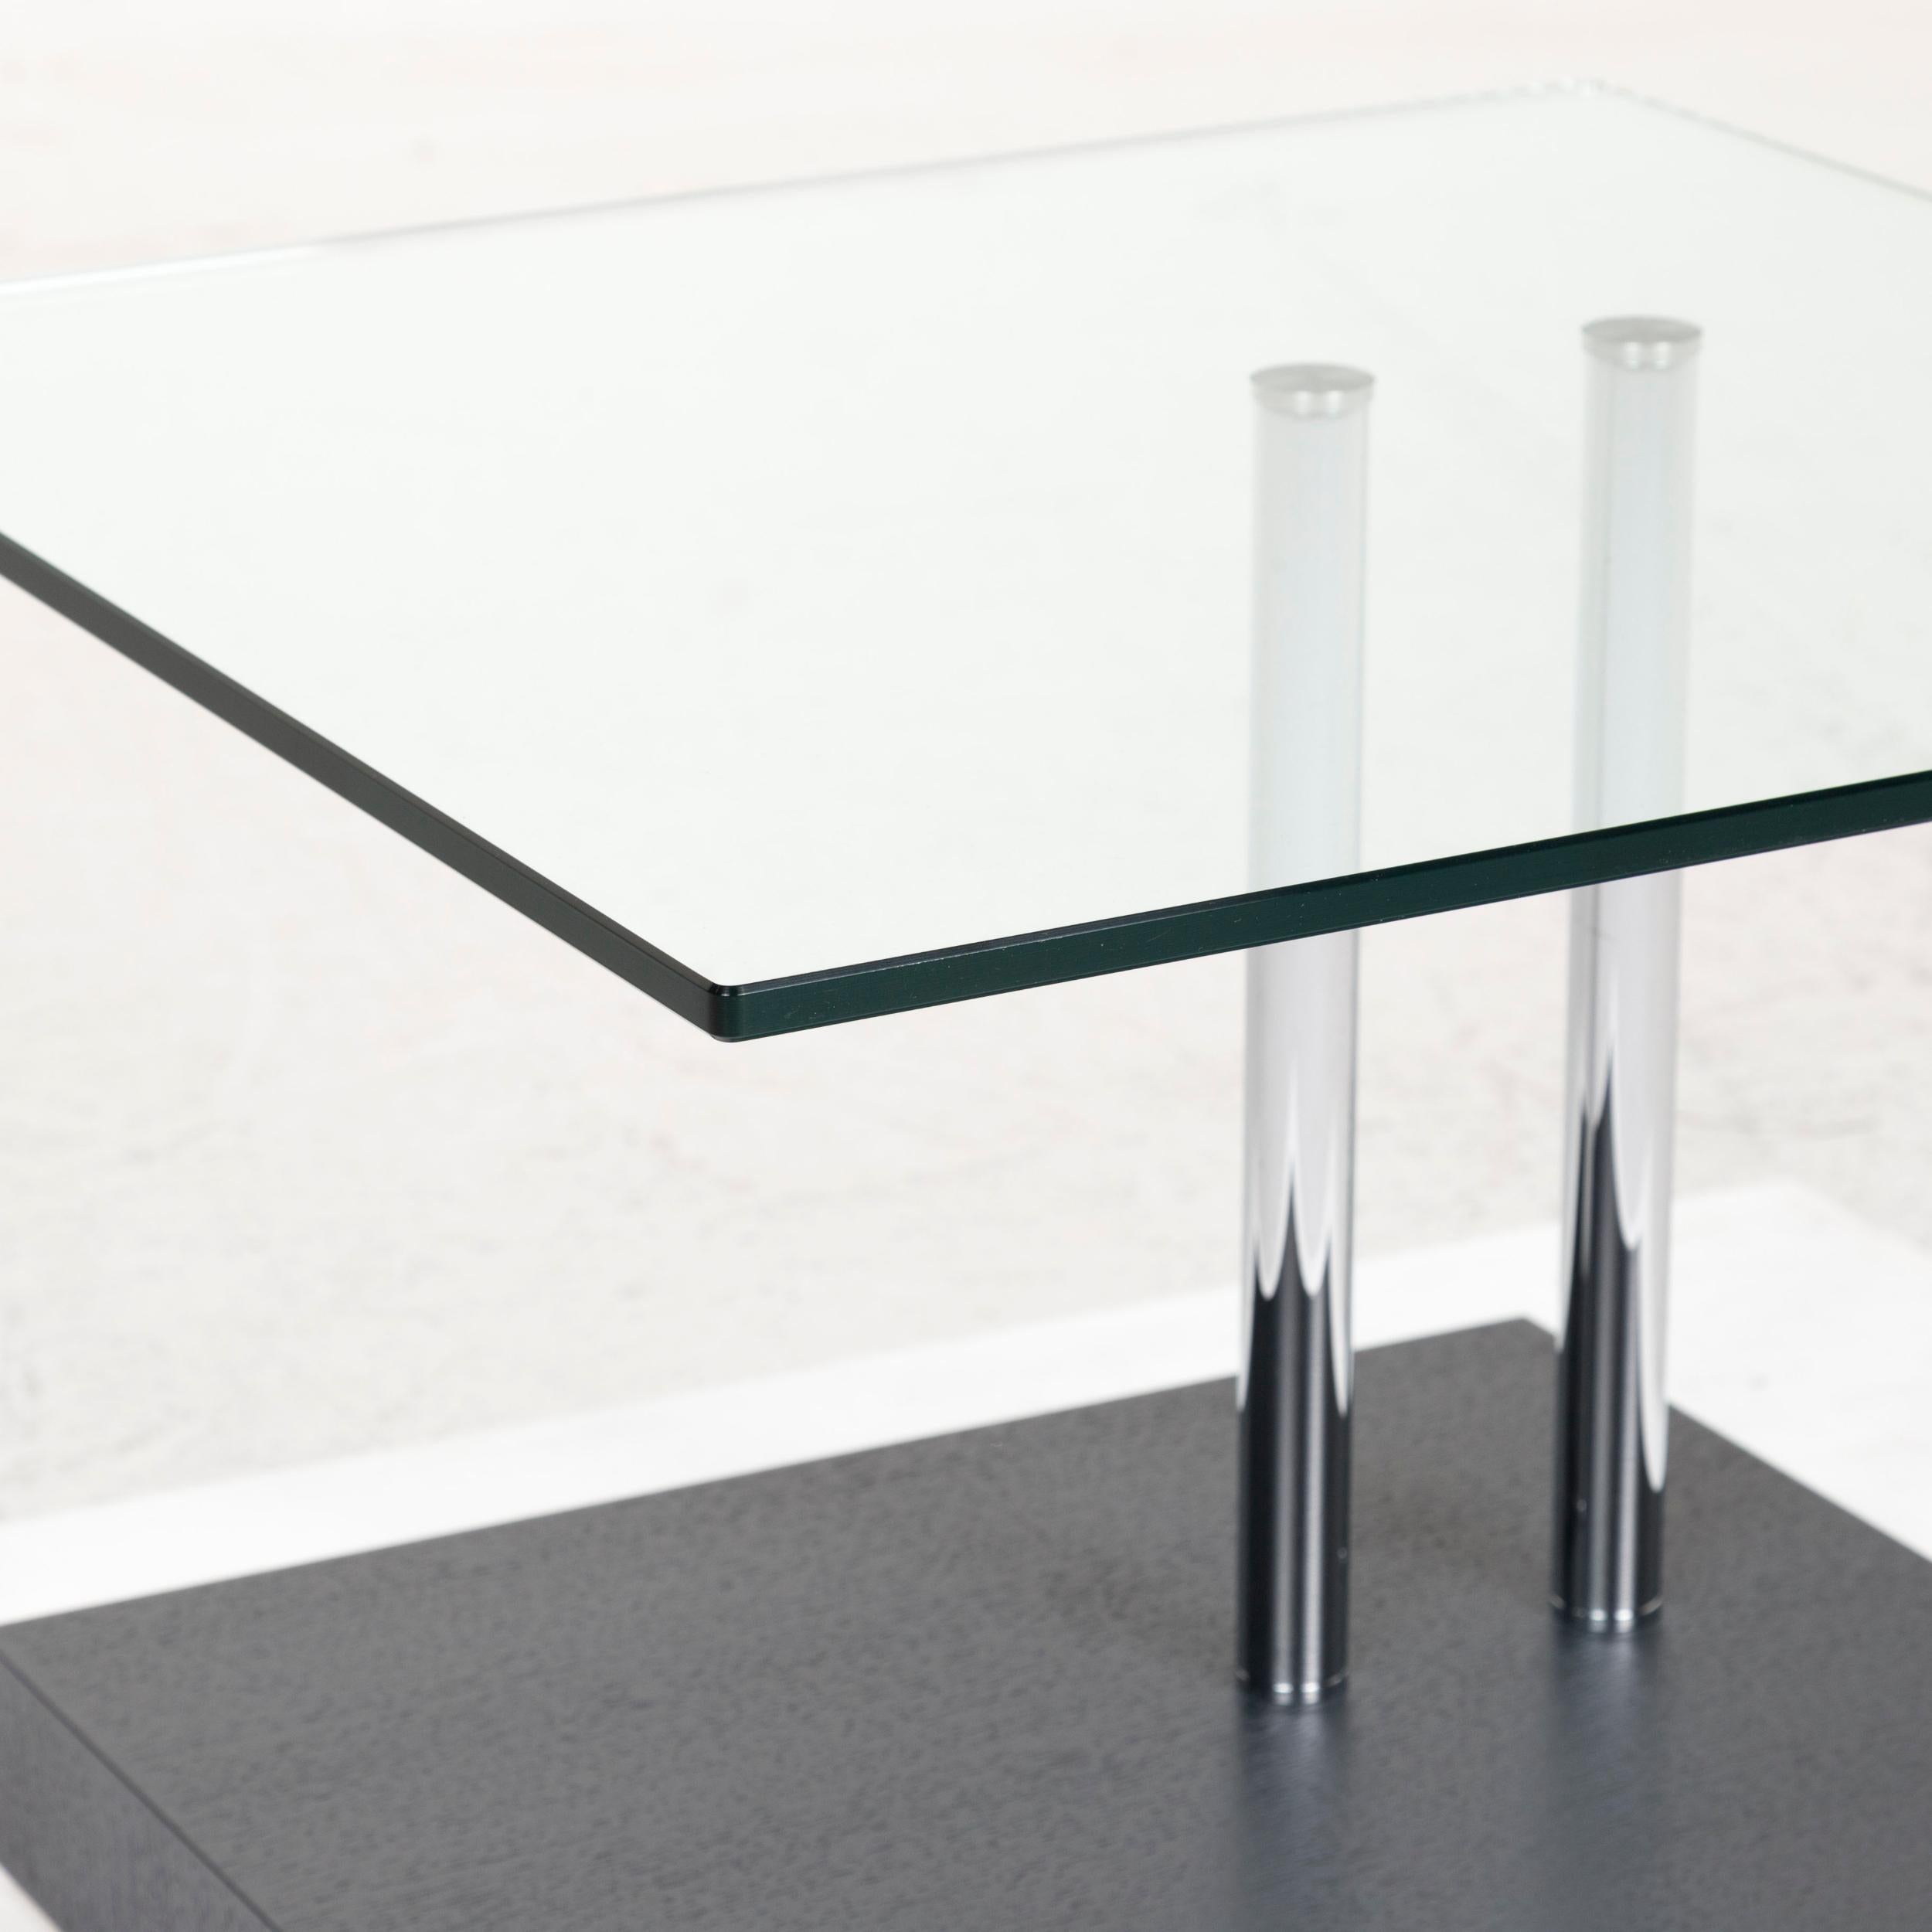 We bring to you a Ronald Schmitt glass coffee table side table.


 Product measurements in centimeters:
 

Depth 61
Width 69
Height 45.





